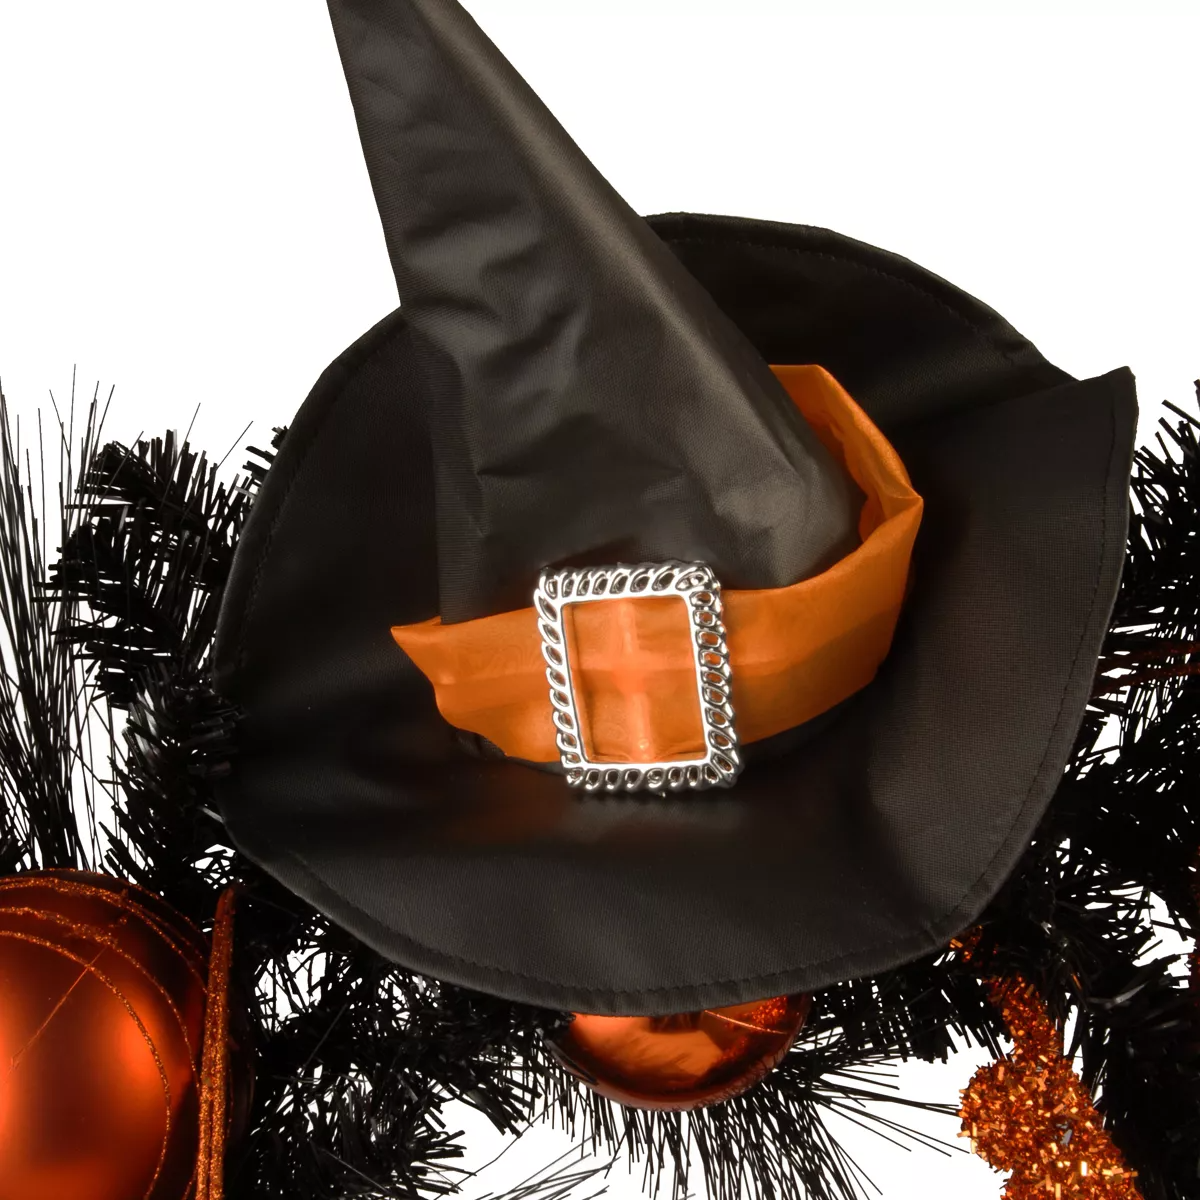 Artificial Witch's Wreath, Decorated with Black and Orange Trim, Ball Ornaments, Halloween Collection, 24 inches